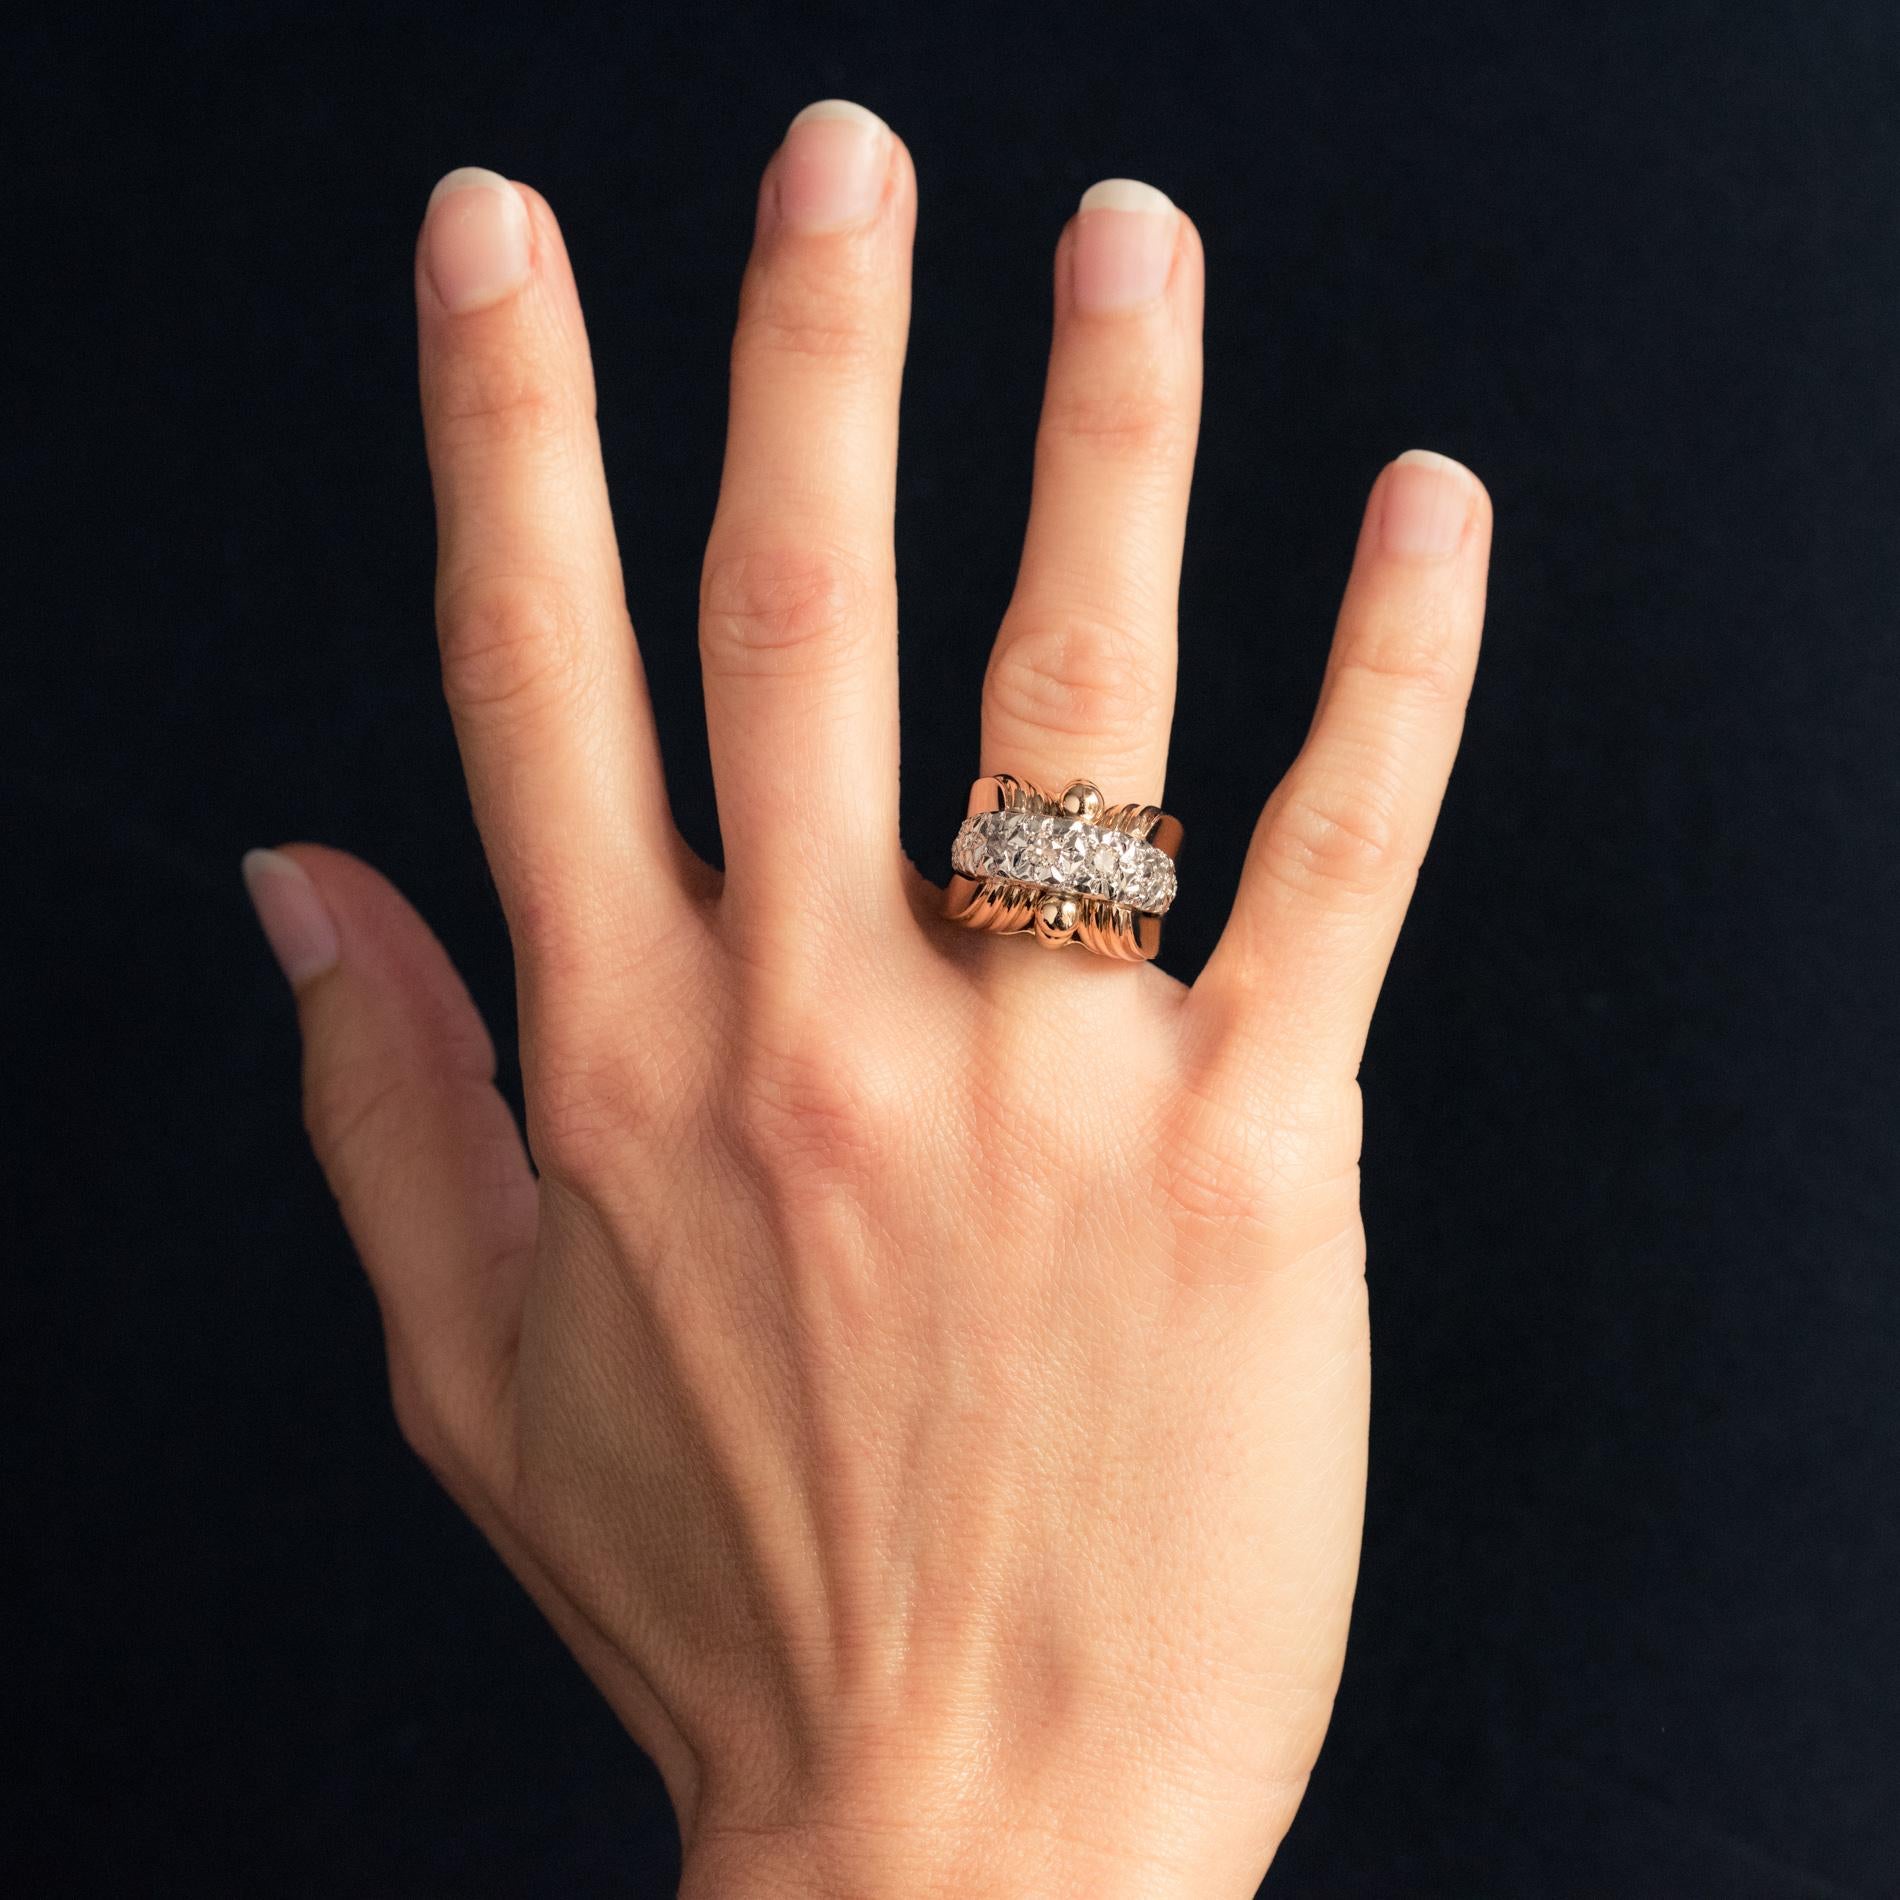 Ring in 18 karat yellow gold and platinum, fish and gazelle's head hallmarks.
Massive and imposing, this splendid retro ring is set with a drop of brilliant-cut and rose-cut diamonds on a chiseled motif, supported on either side by 2x3 falling gold